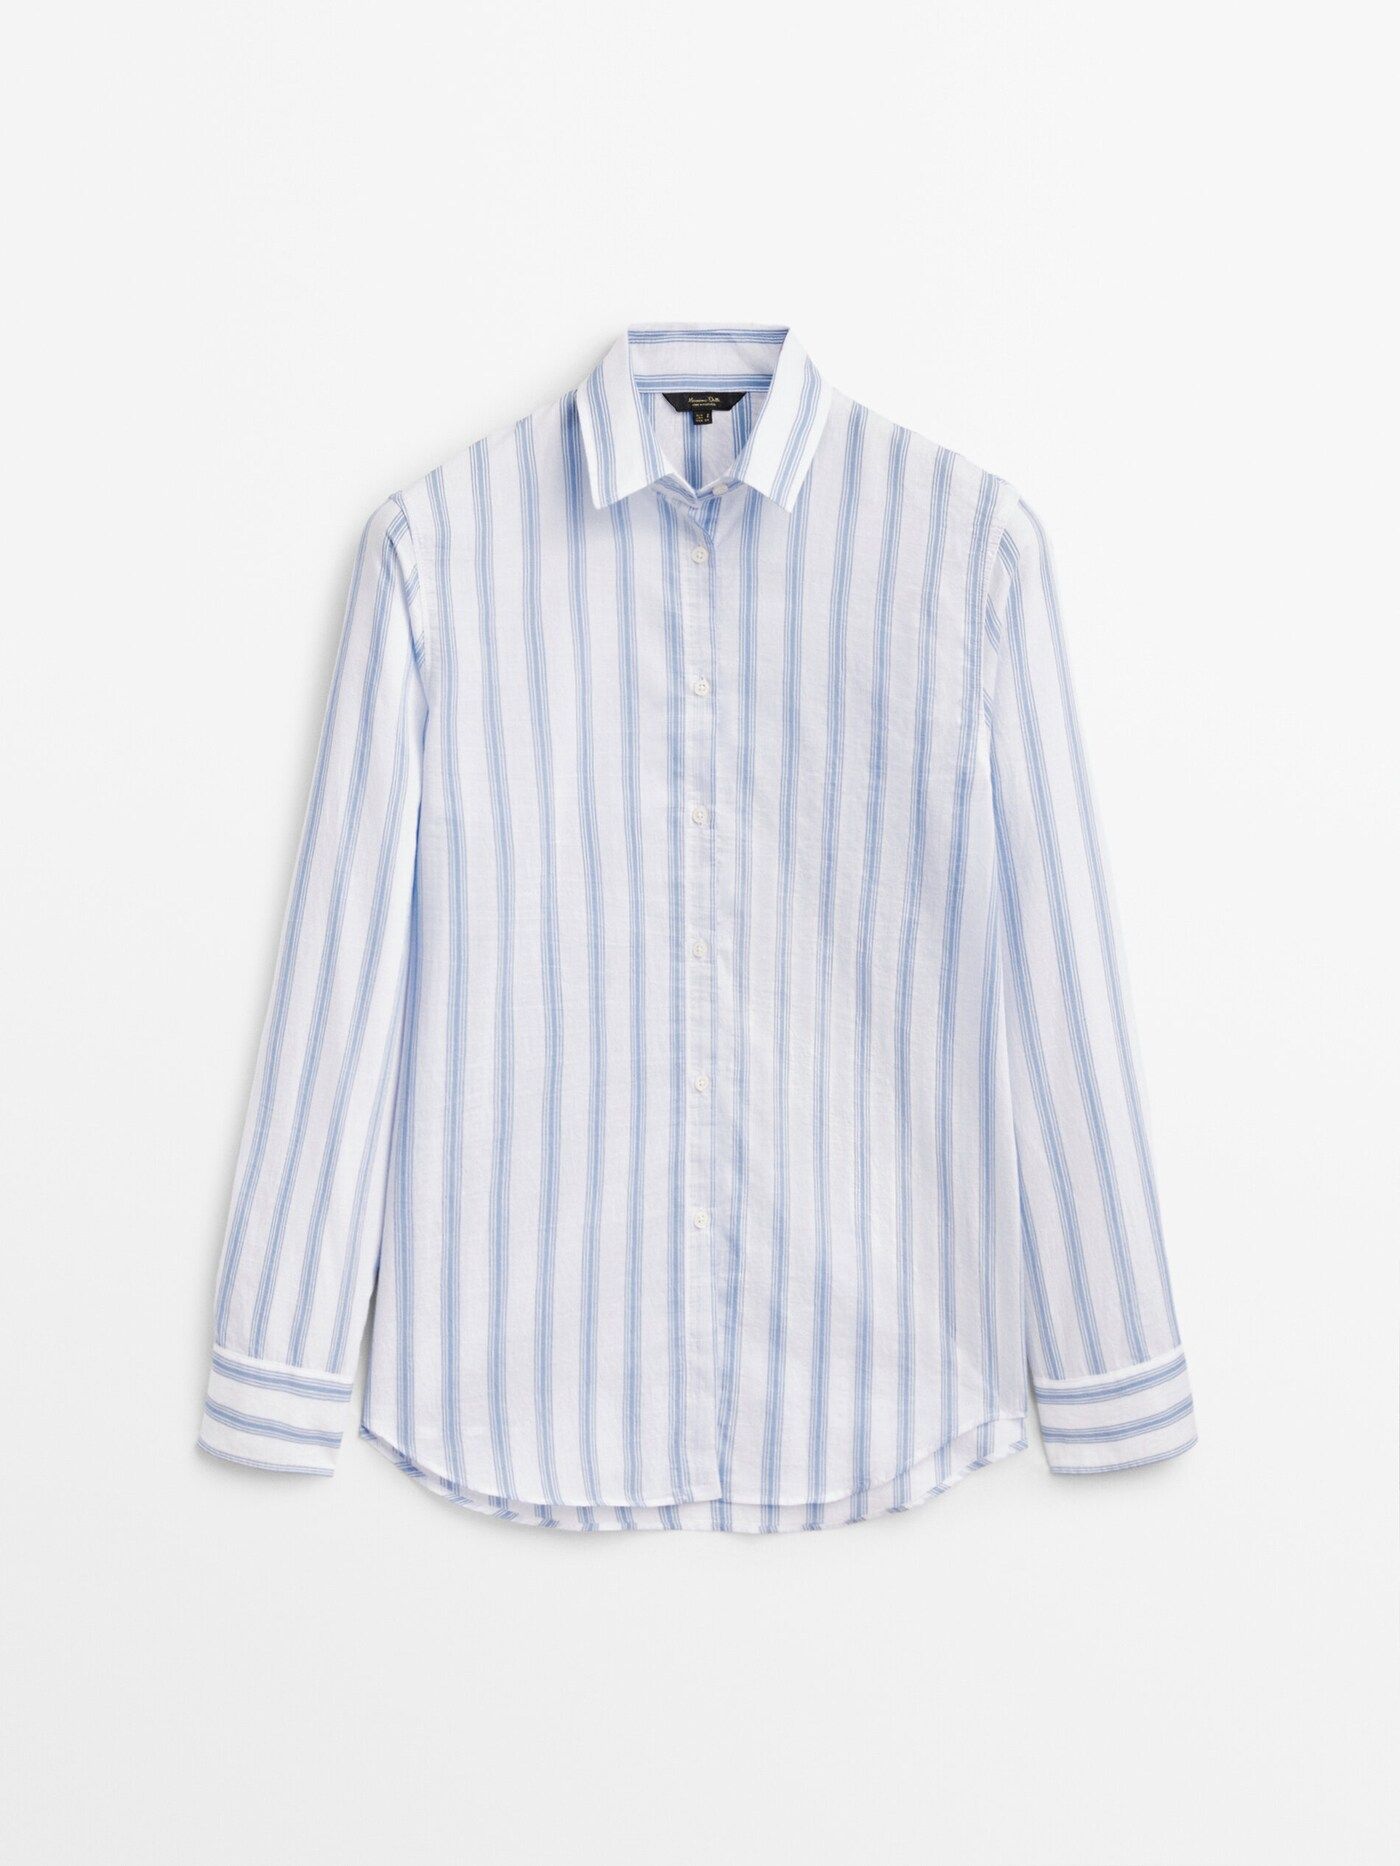 Cotton blend shirt with double stripe | Massimo Dutti (US)